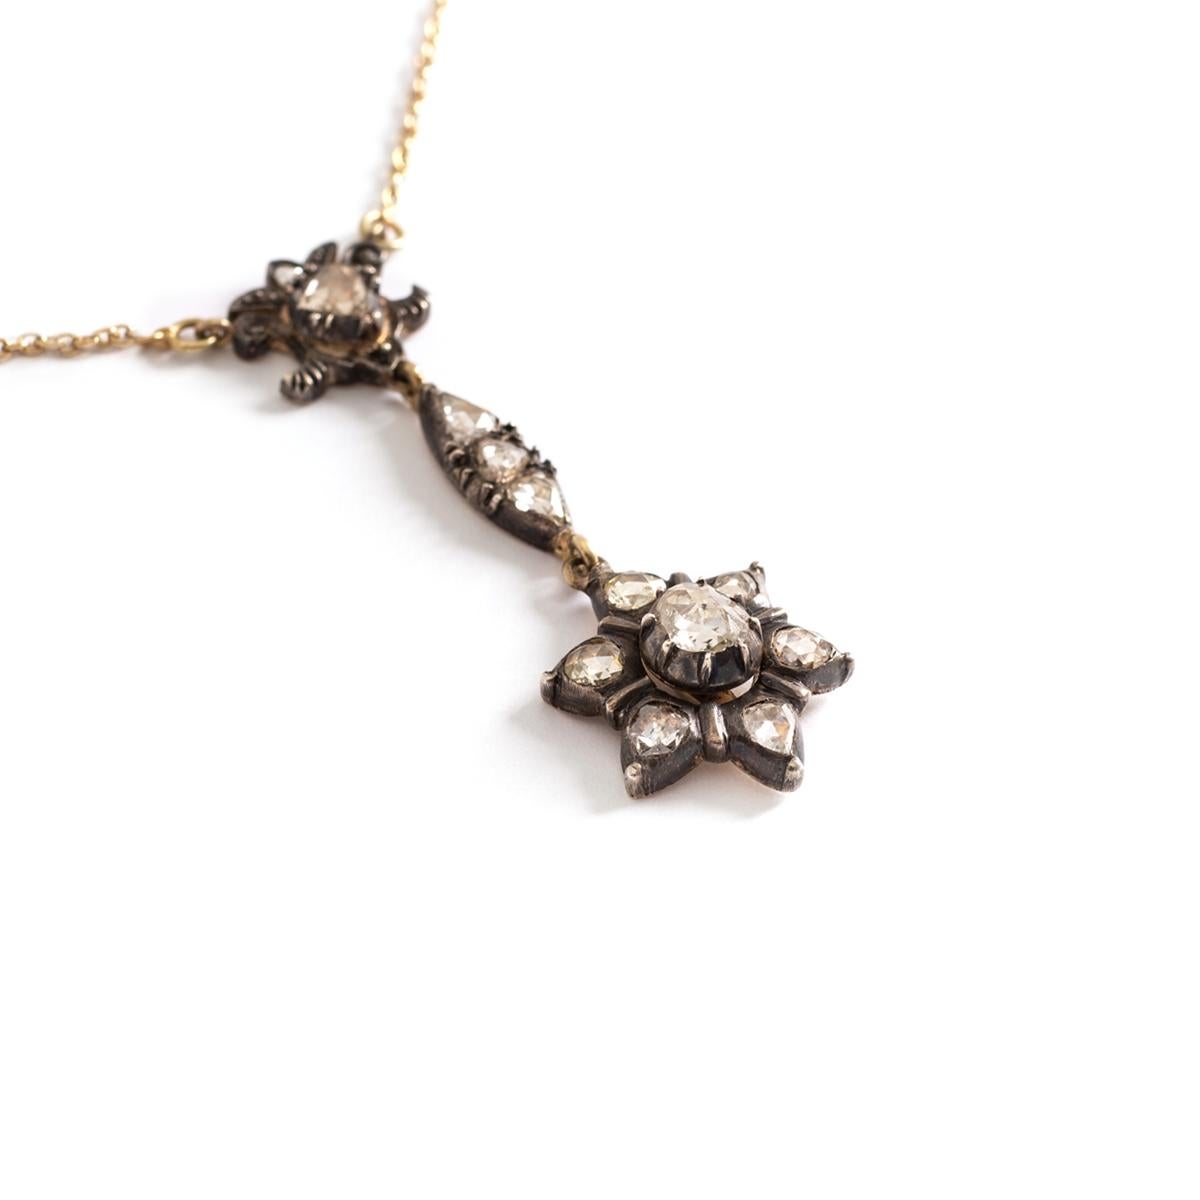 Antique Rose cut Diamond on Silver and Gold Chain Necklace.
Pendant representing a Star.
Pendant length: 4.50 centimeters.
Star's diameter: approximately 16.24 millimeters.
Central rose cut Diameter diameter: 5.60 millimeters.
Chain necklace length: